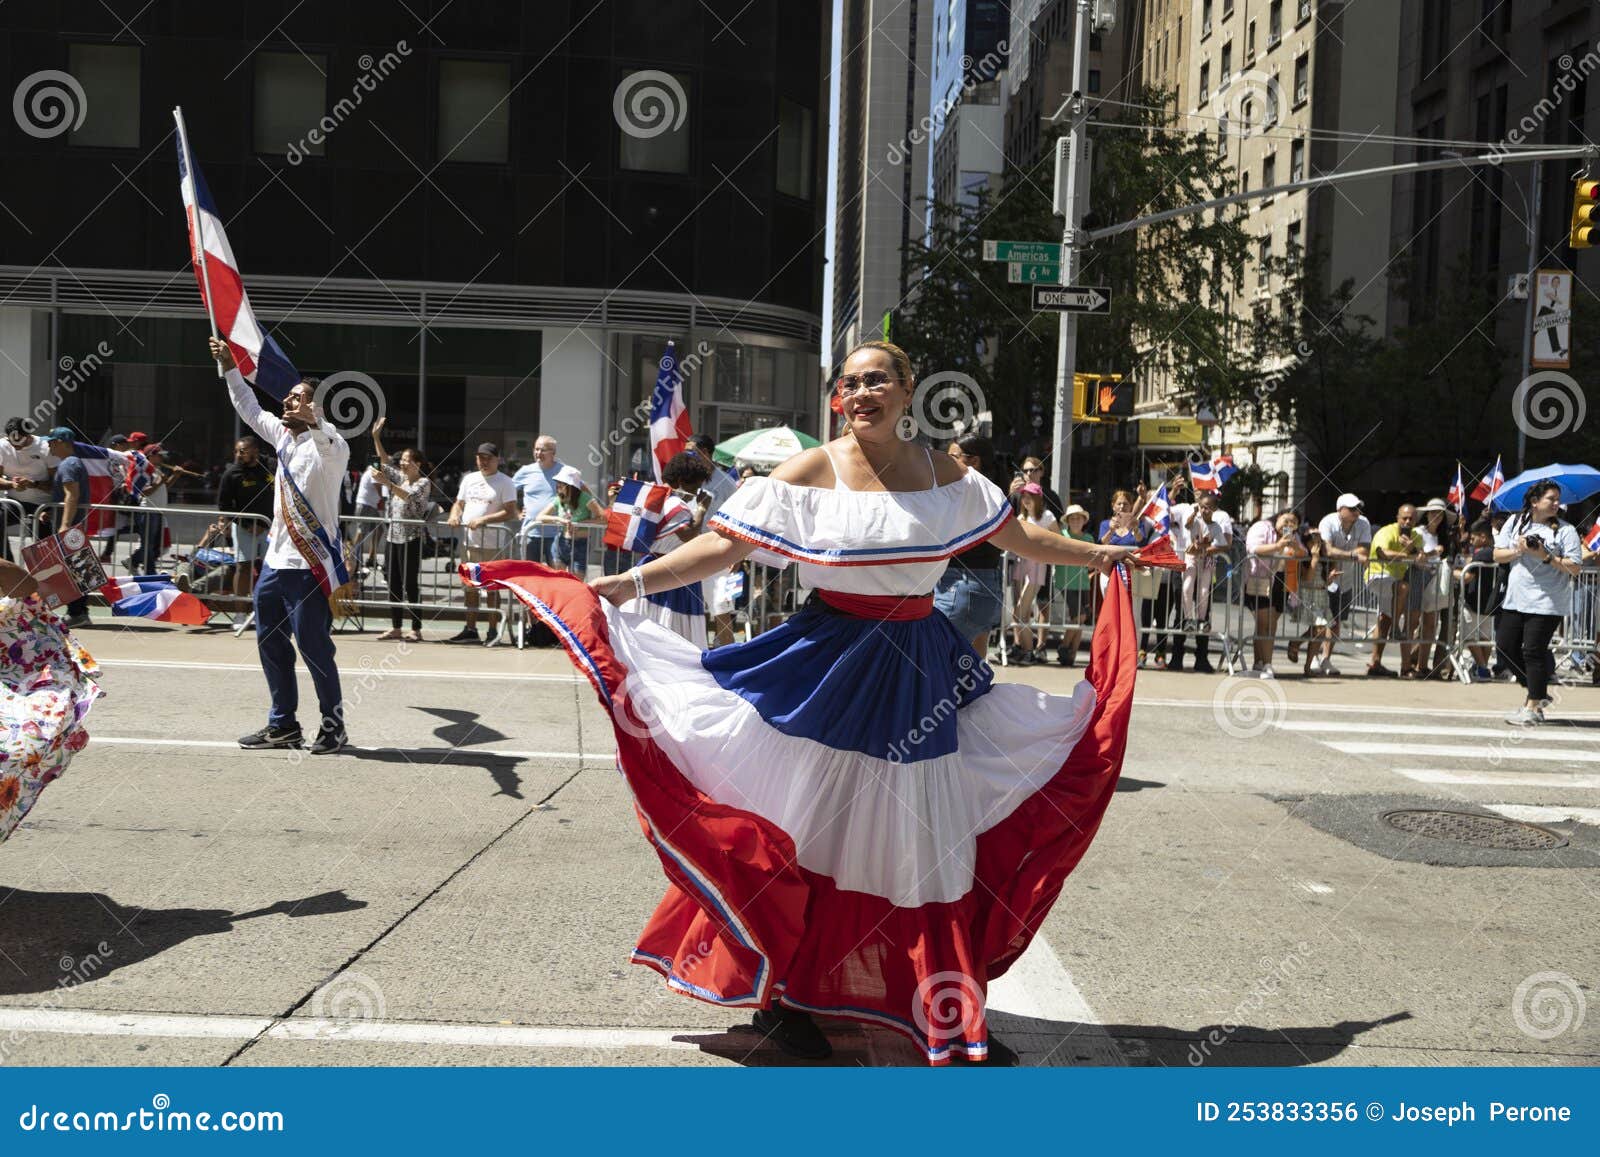 A Woman Dances During The Dominican Day Parade Editorial Photo Image Of Dances Crowd 253833356